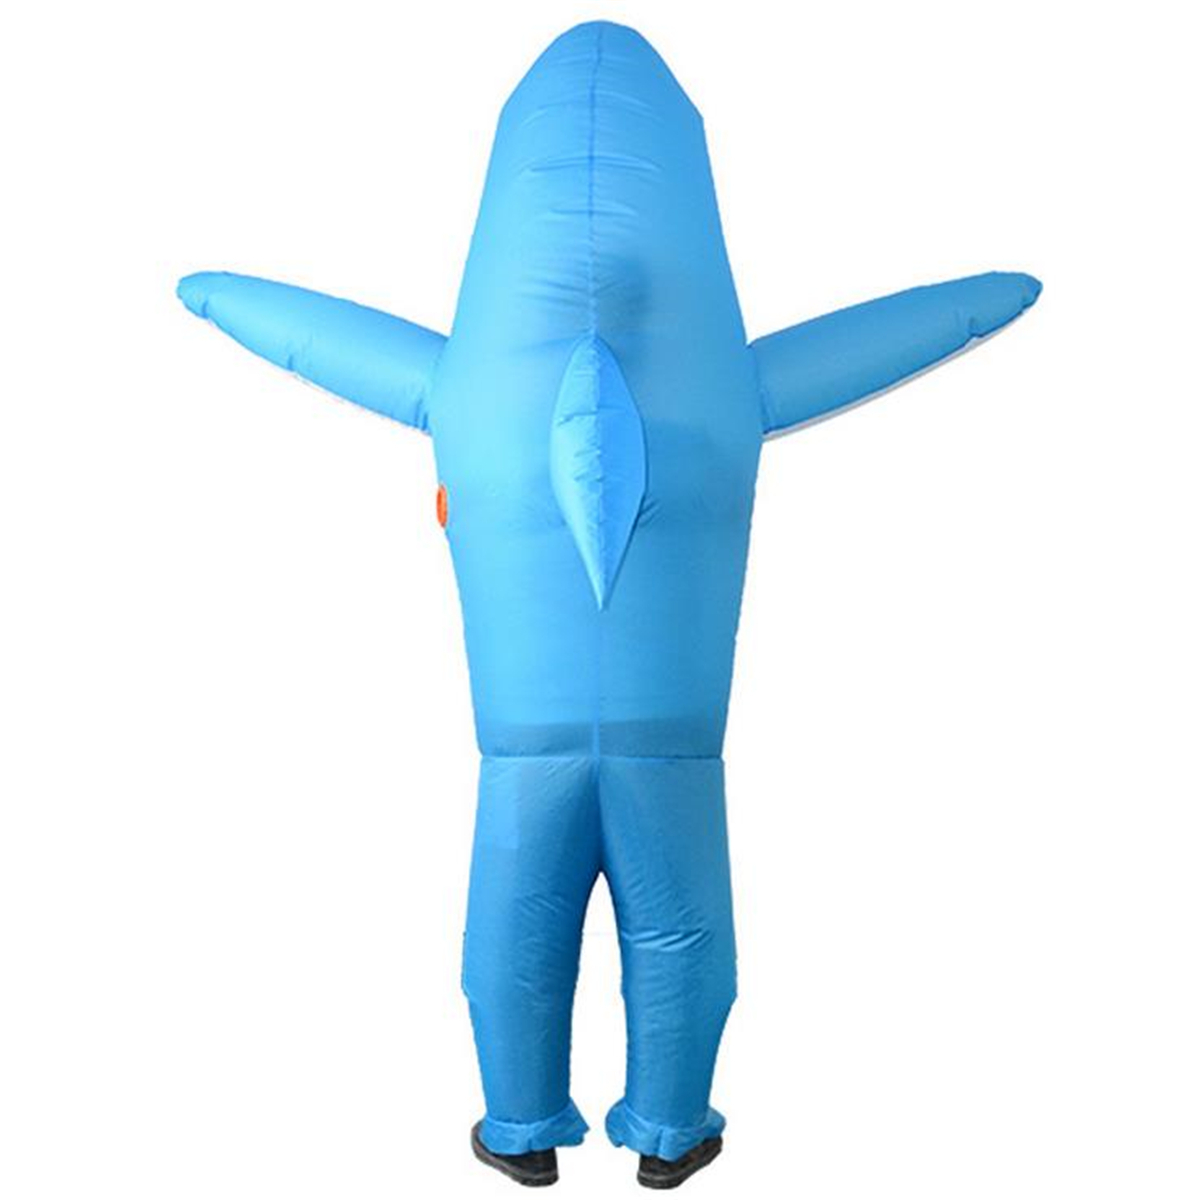 Inflatable Costumes Shark Adult Halloween Fancy Dress Funny Scary Dress Costume 13